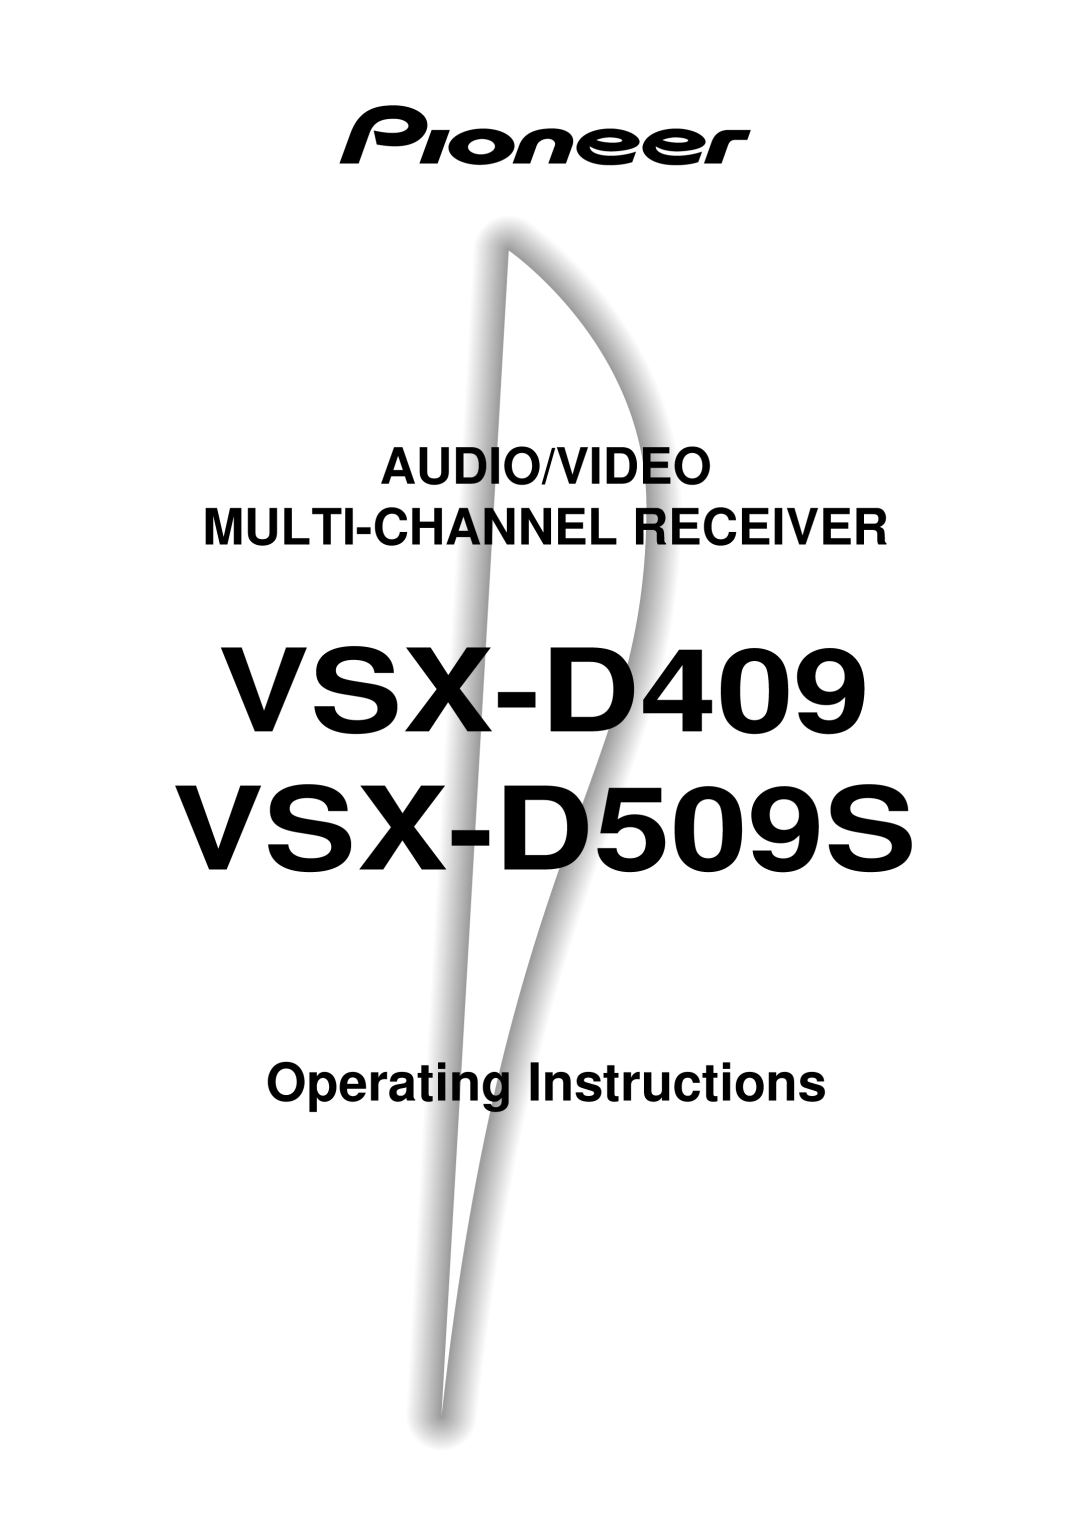 Pioneer manual VSX-D409 VSX-D509S, Operating Instructions, Audio/Video Multi-Channelreceiver 